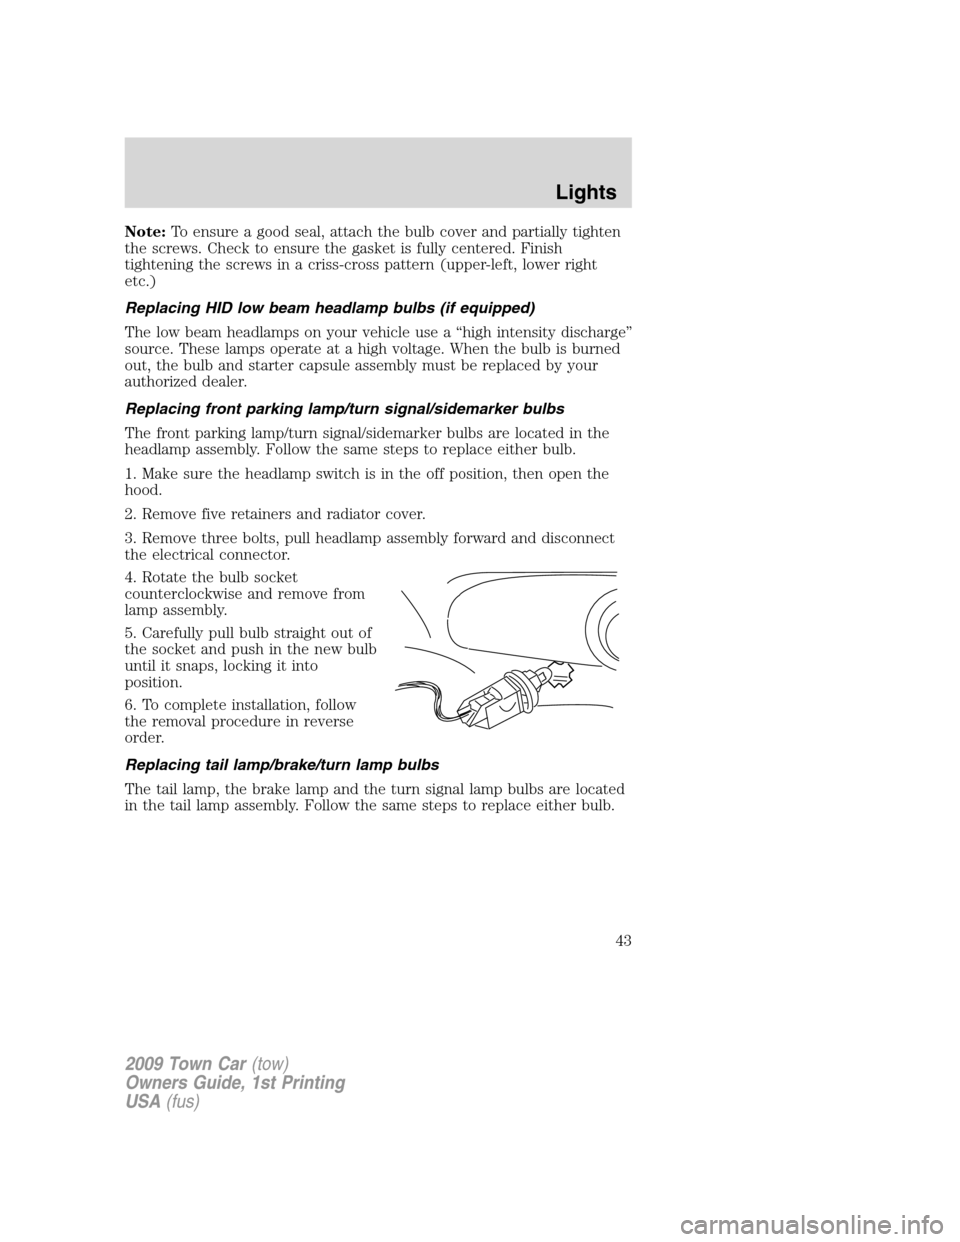 LINCOLN TOWN CAR 2009 Service Manual Note:To ensure a good seal, attach the bulb cover and partially tighten
the screws. Check to ensure the gasket is fully centered. Finish
tightening the screws in a criss-cross pattern (upper-left, low